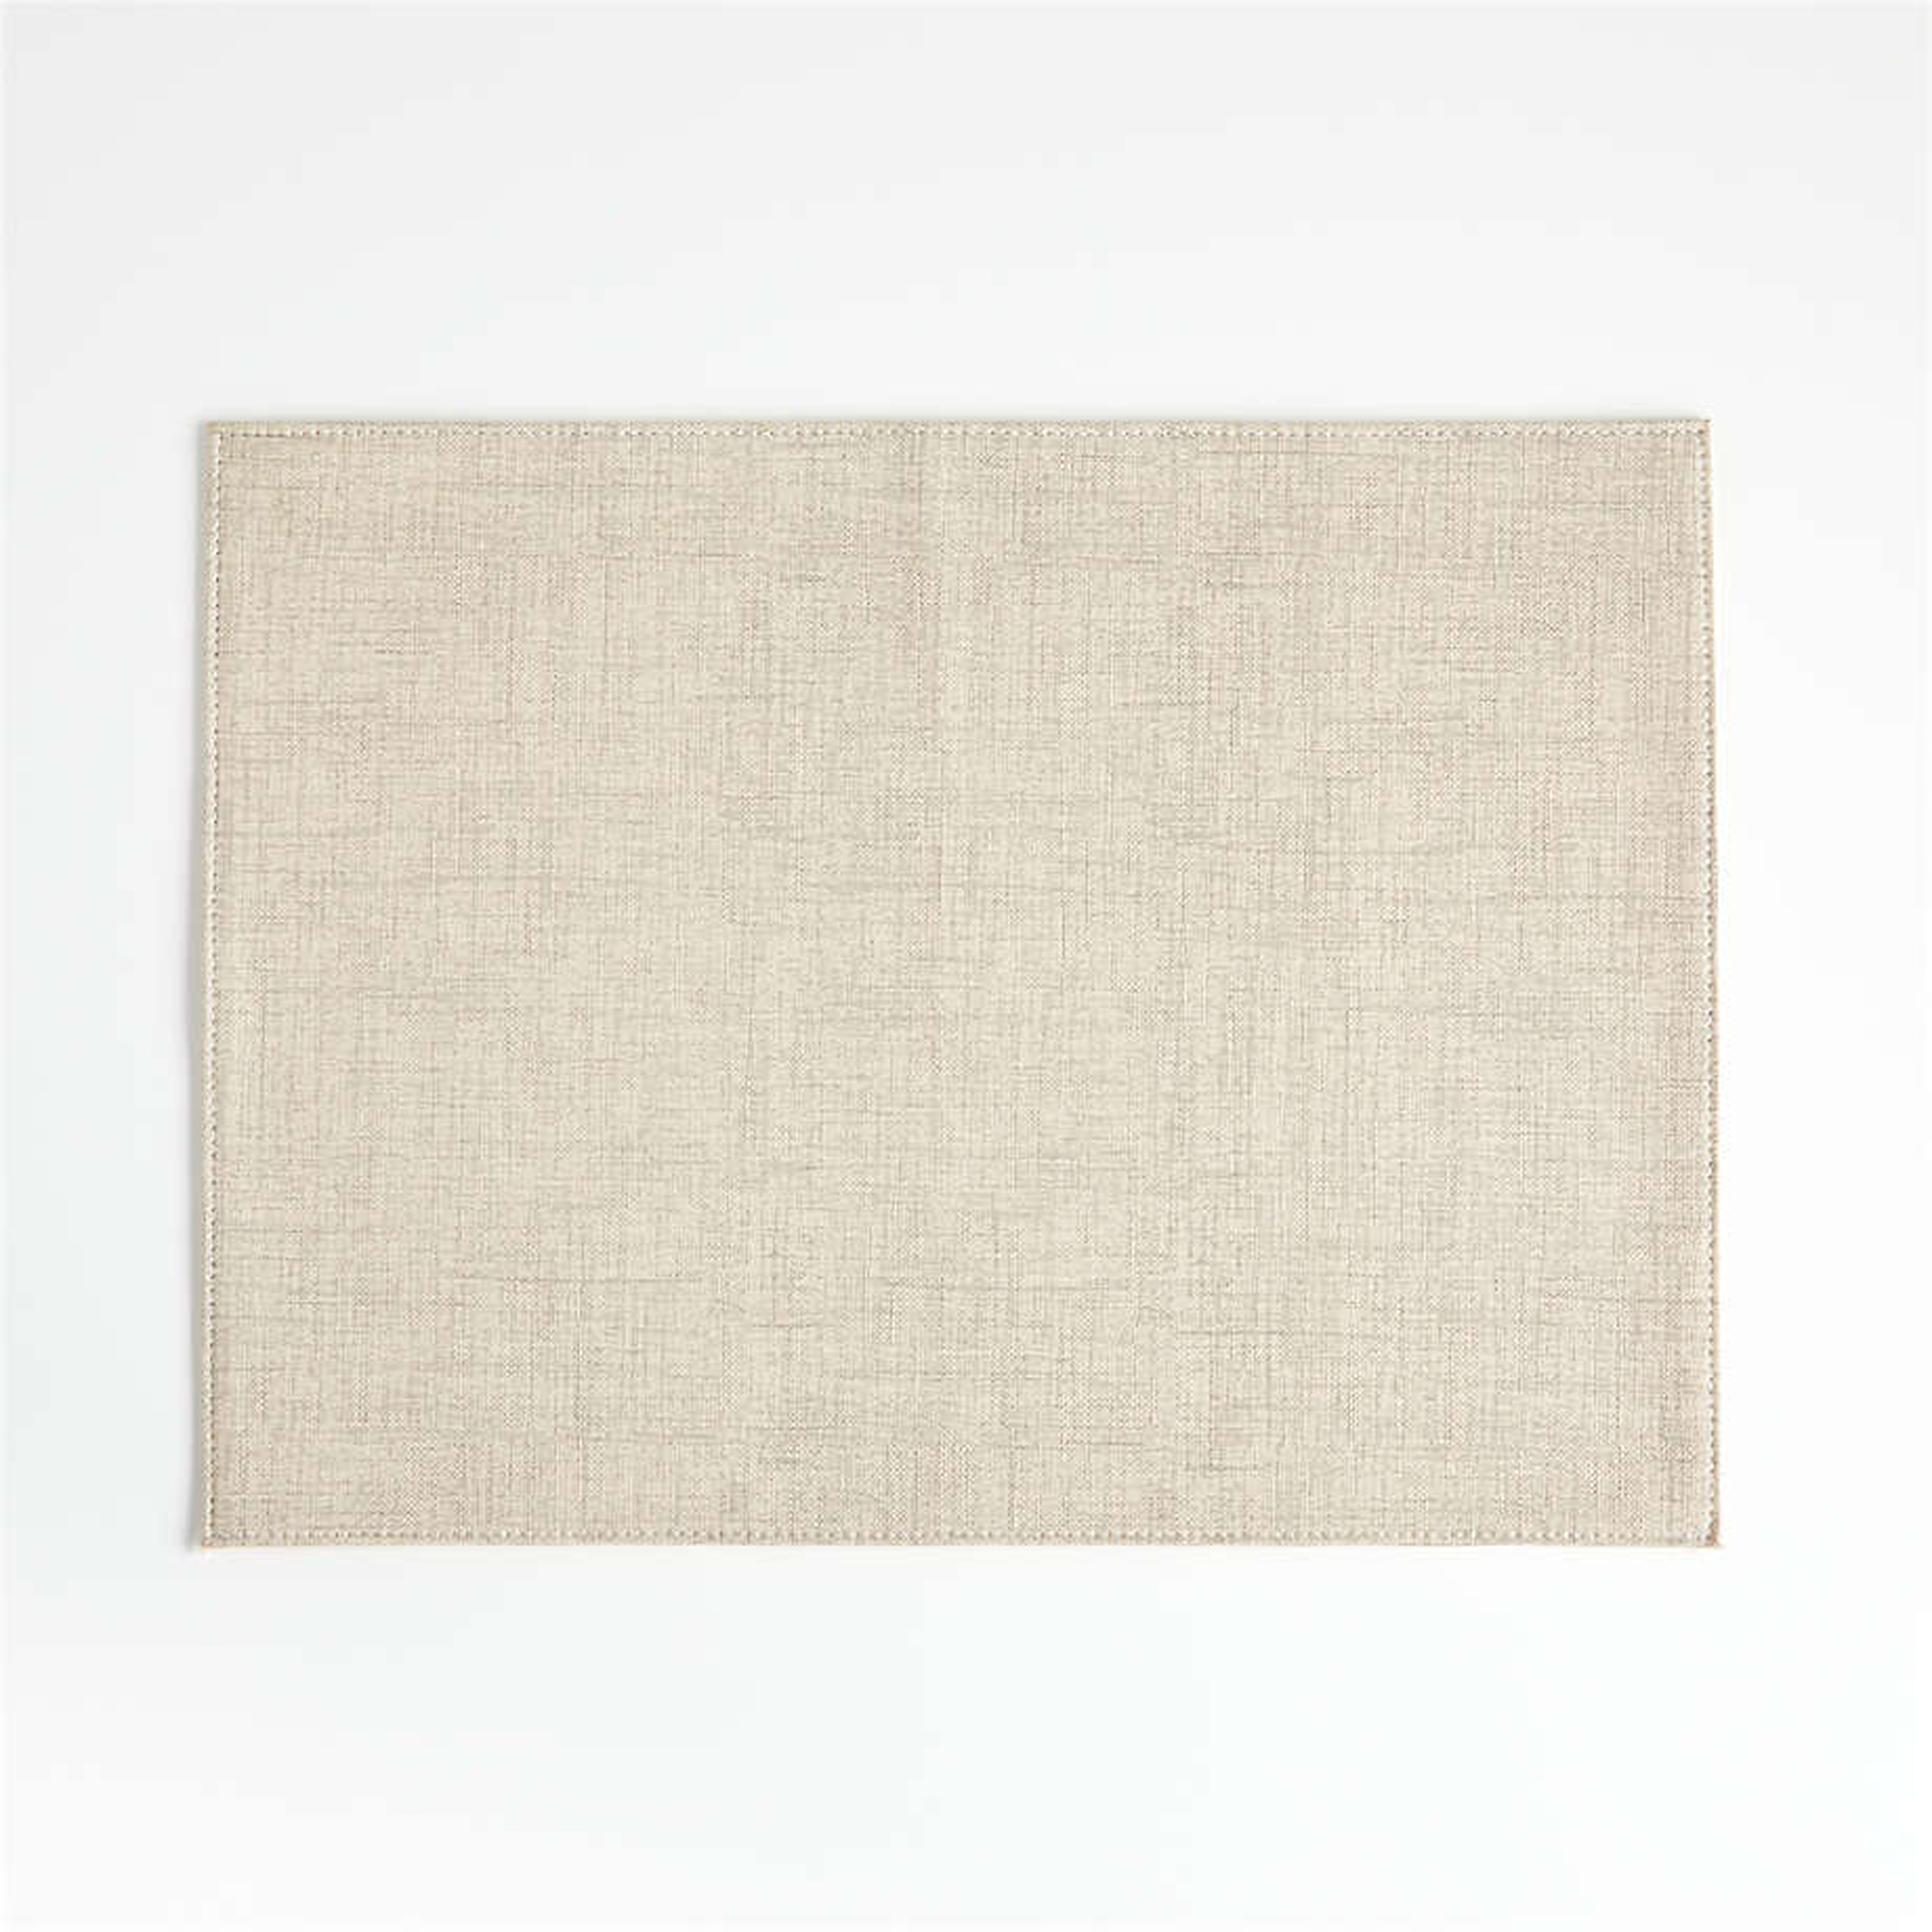 Shiloh Rectangular Taupe Easy-Clean Placemat - Crate and Barrel